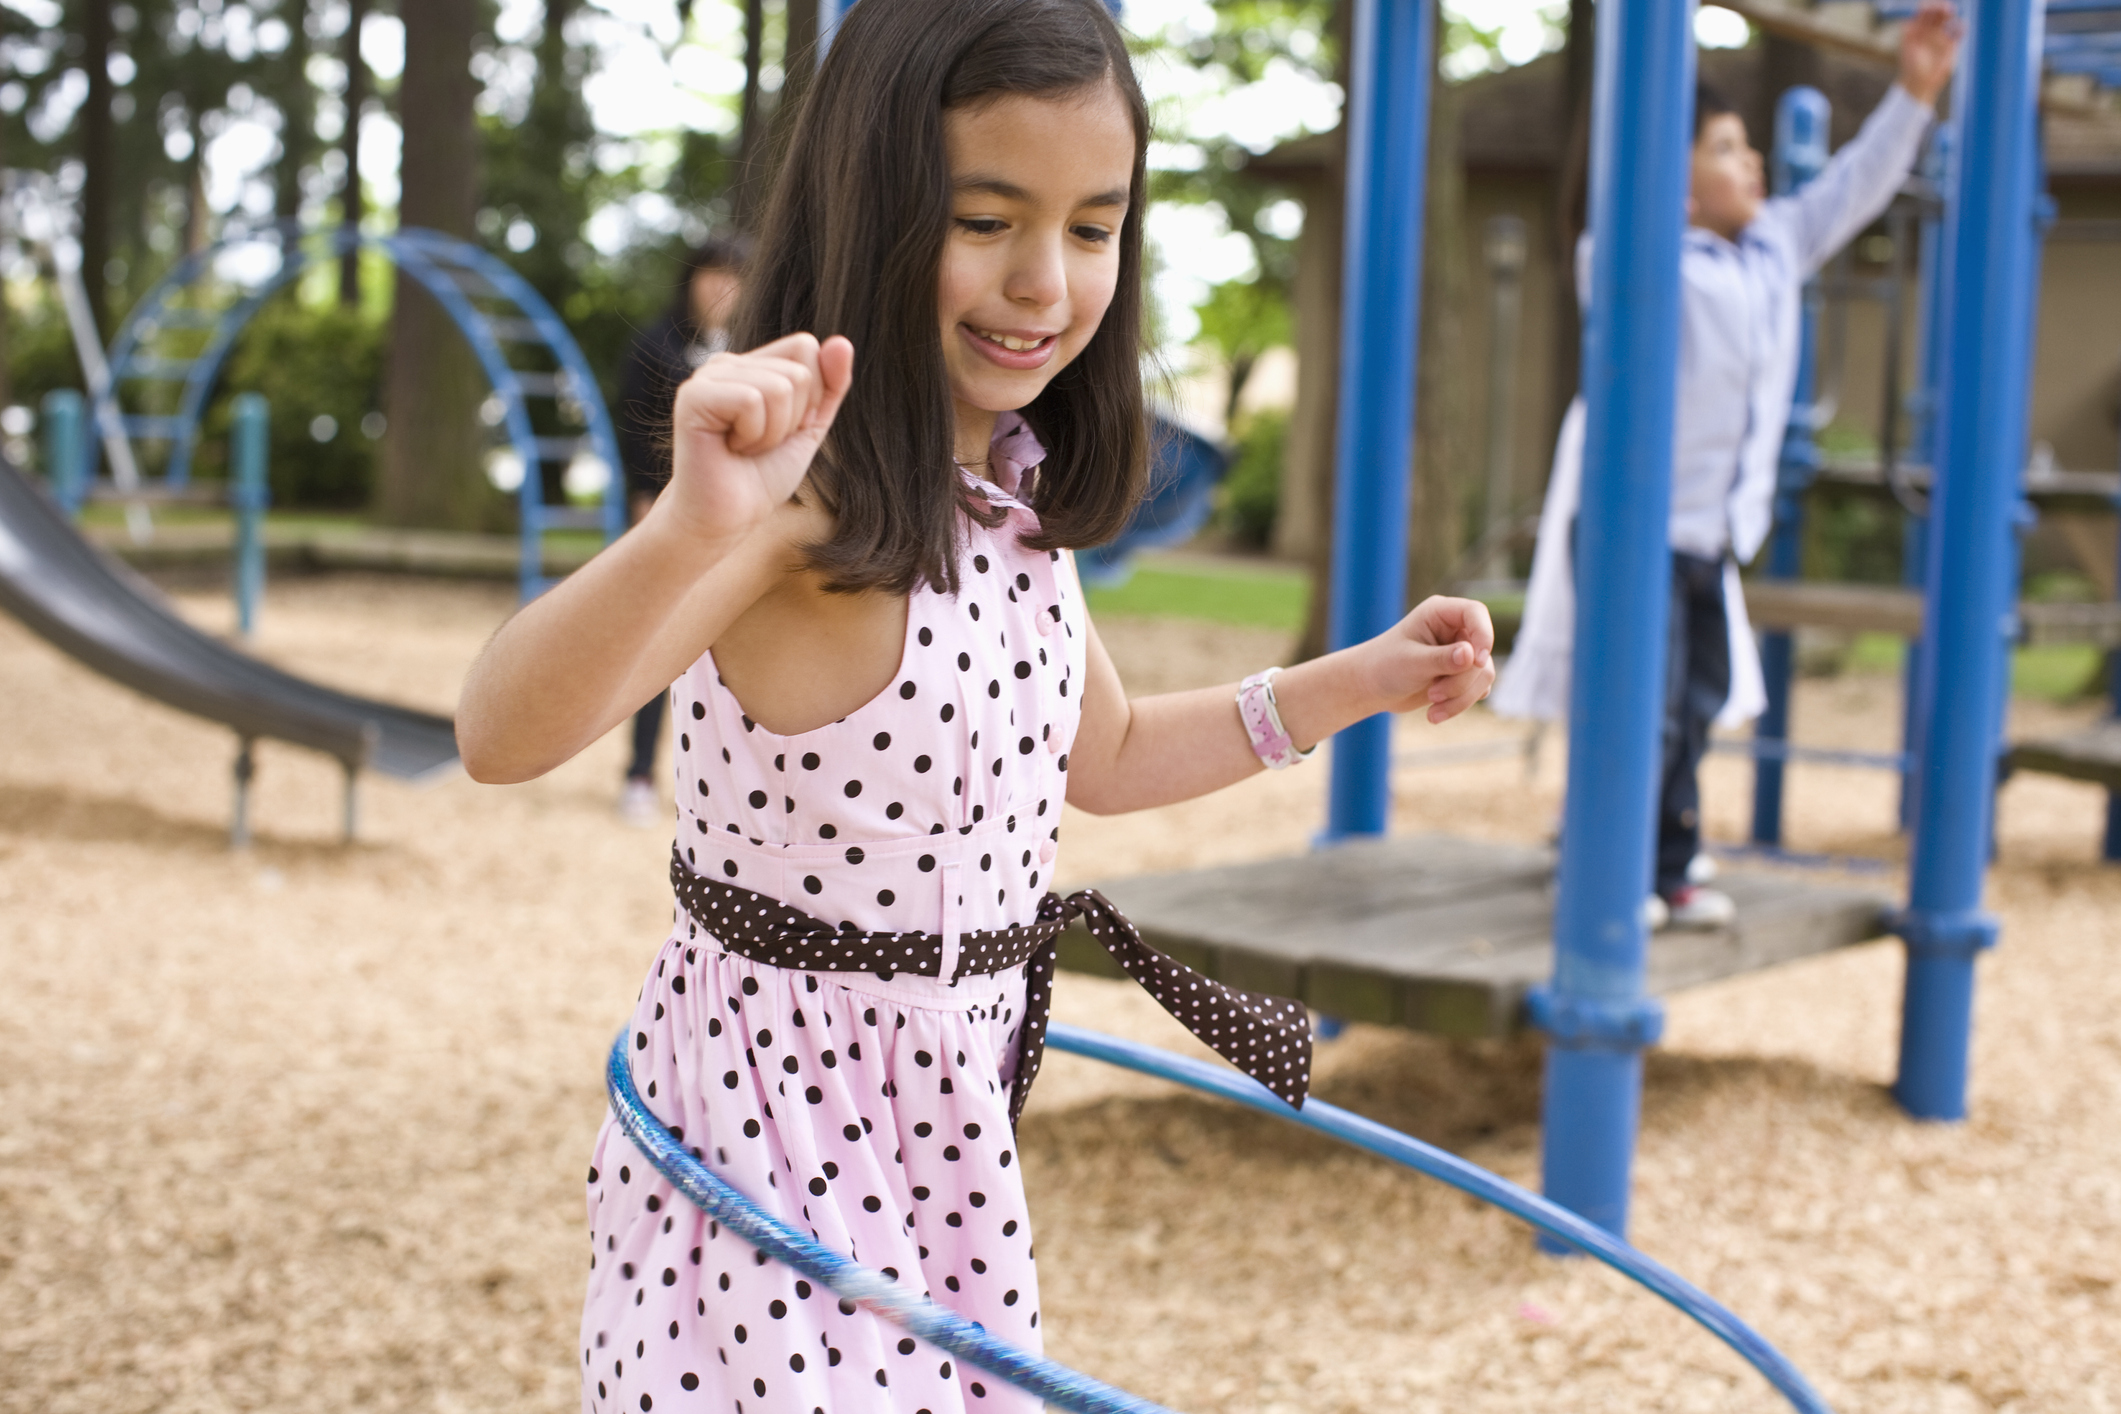 A girl is hula-hooping on the playground, but ostracized for being hyperactive.